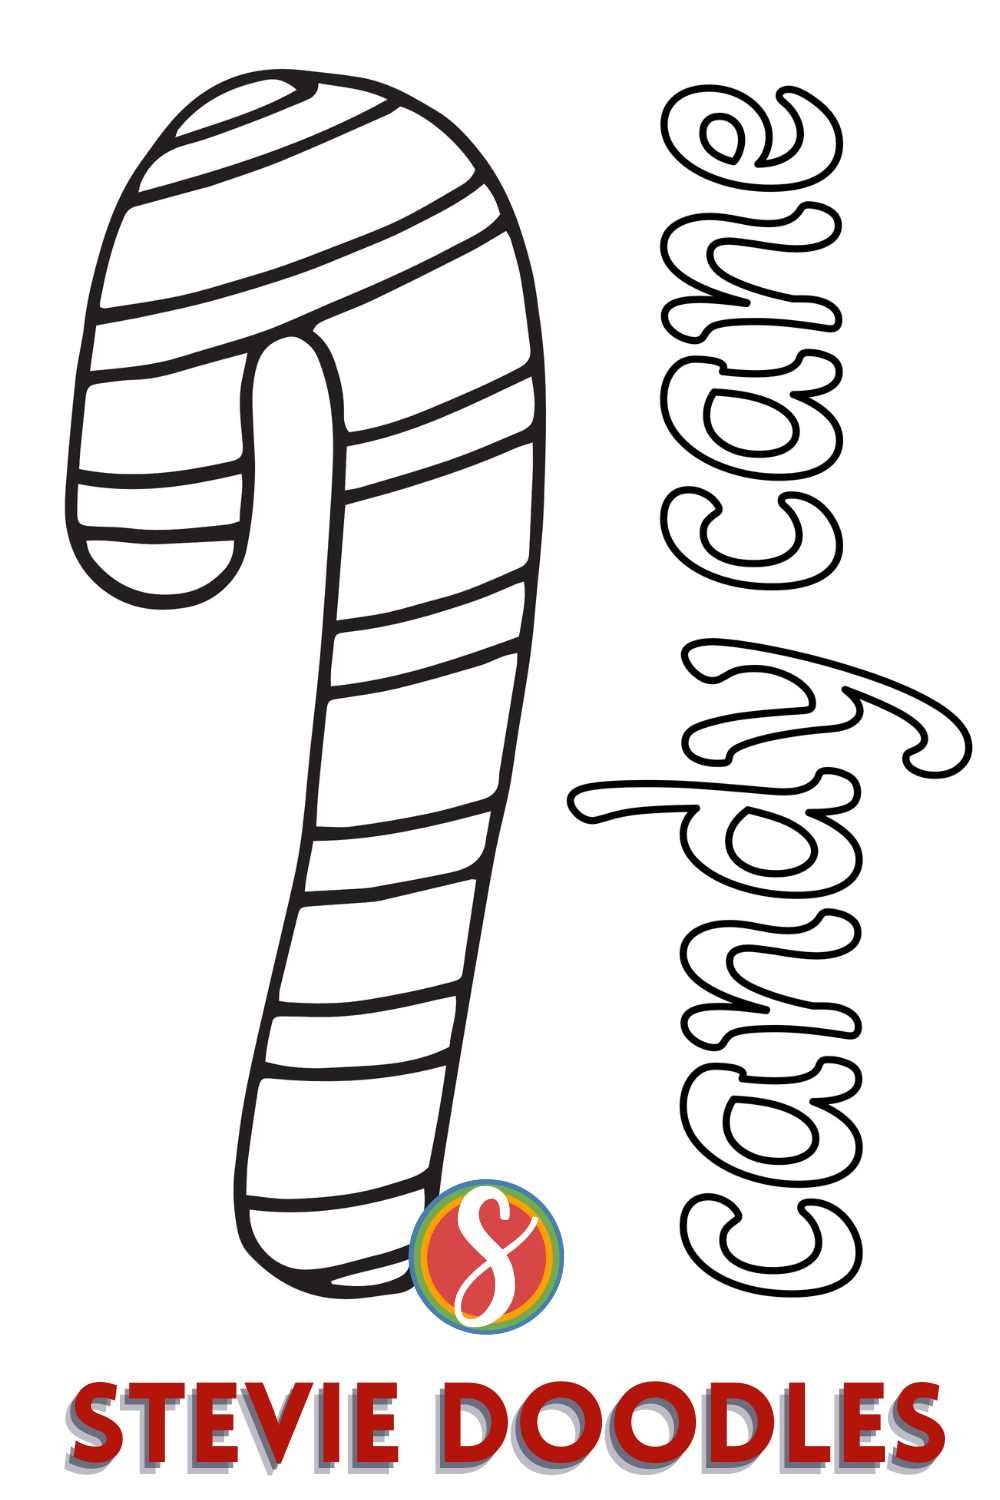 candy cane to color on the left, colorable words "candy cane" on the right